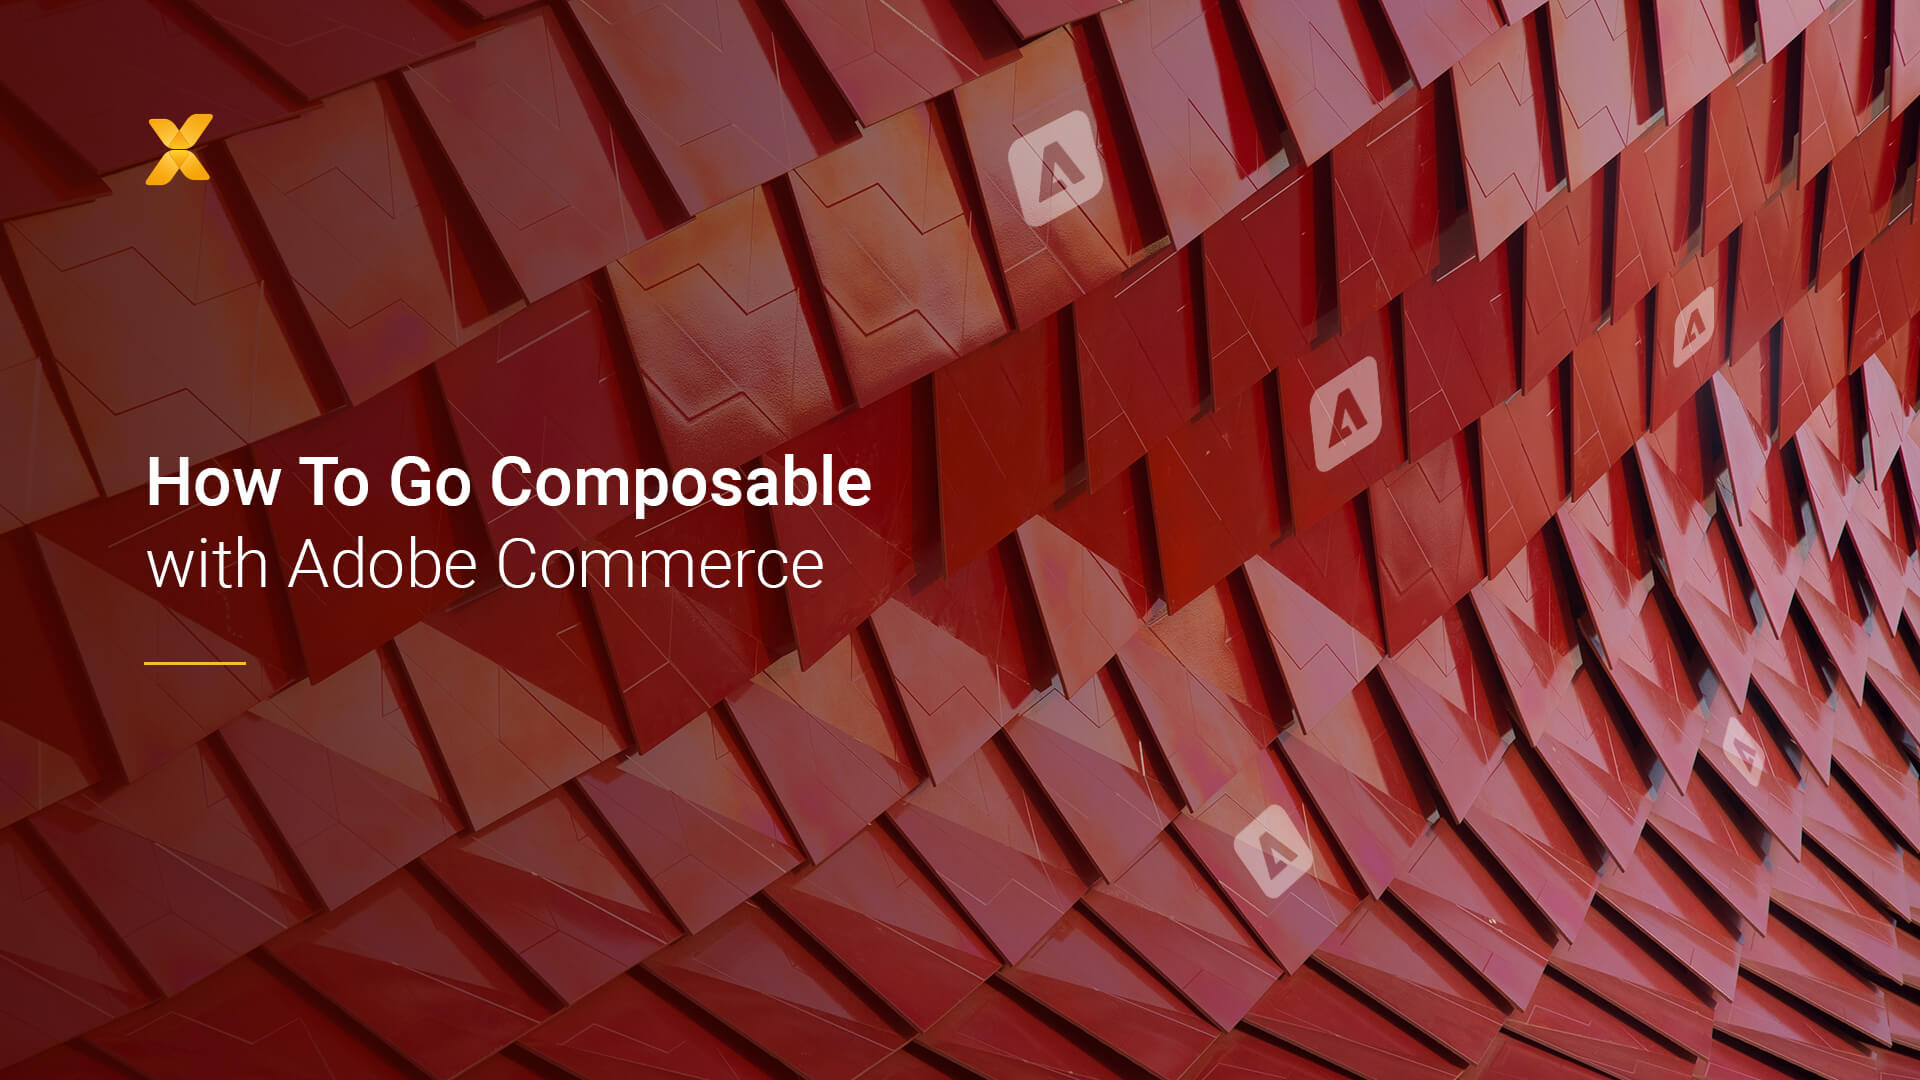 Abstract image with tite "How To Go Composable with Adobe Commerce."